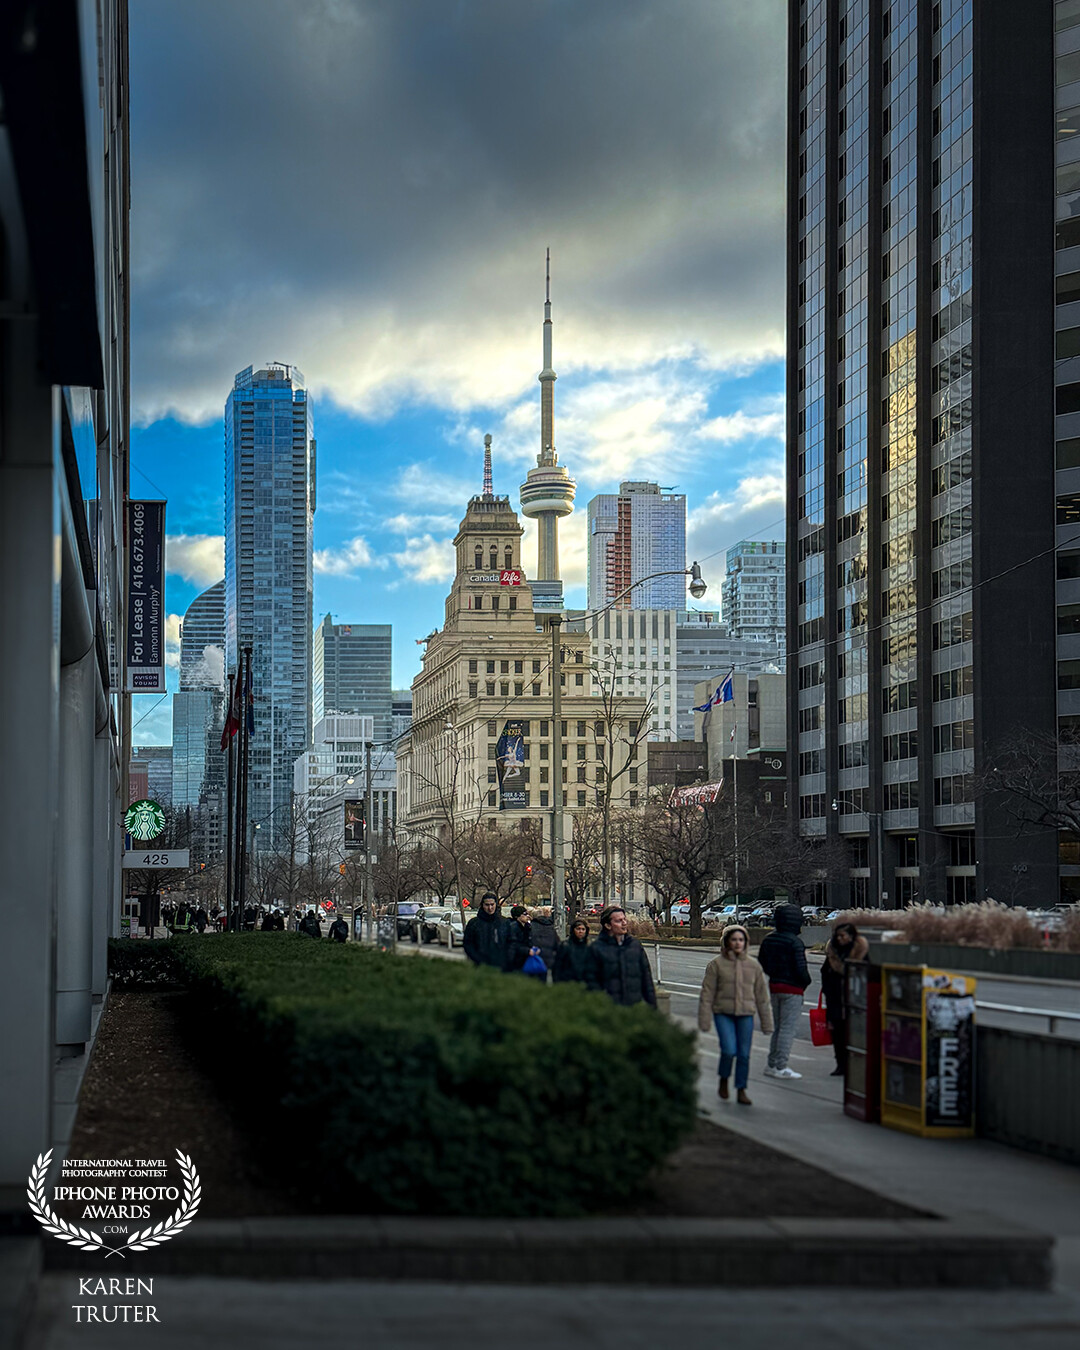 Walking the streets of Toronto, Canada, I turned the corner and this was the sight. The light captured the older building in a way that framed the famous CN tower and this scene was framed by the tall modern buildings on either side of the street. A “Frame within a Frame”.